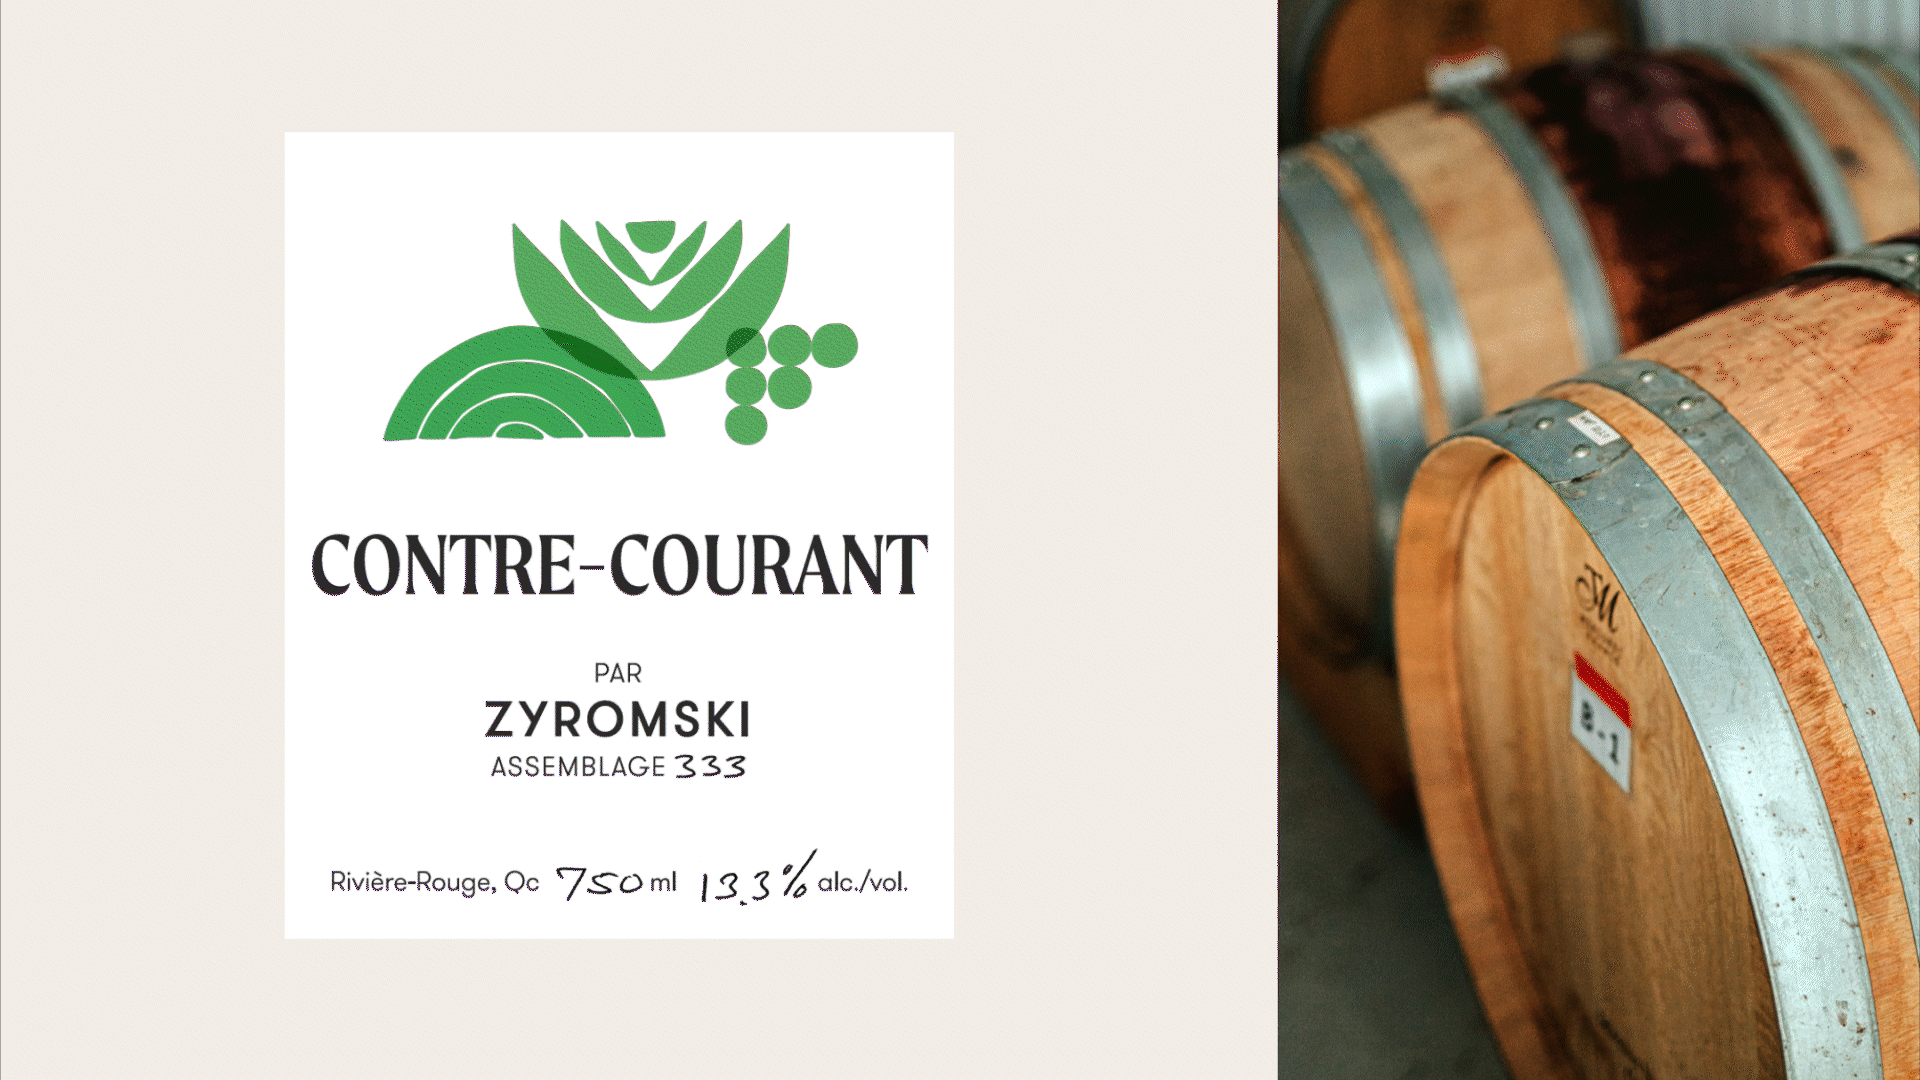 Label on the bottle of the Contre-Courant with green graphic elements reminding vines and grapes